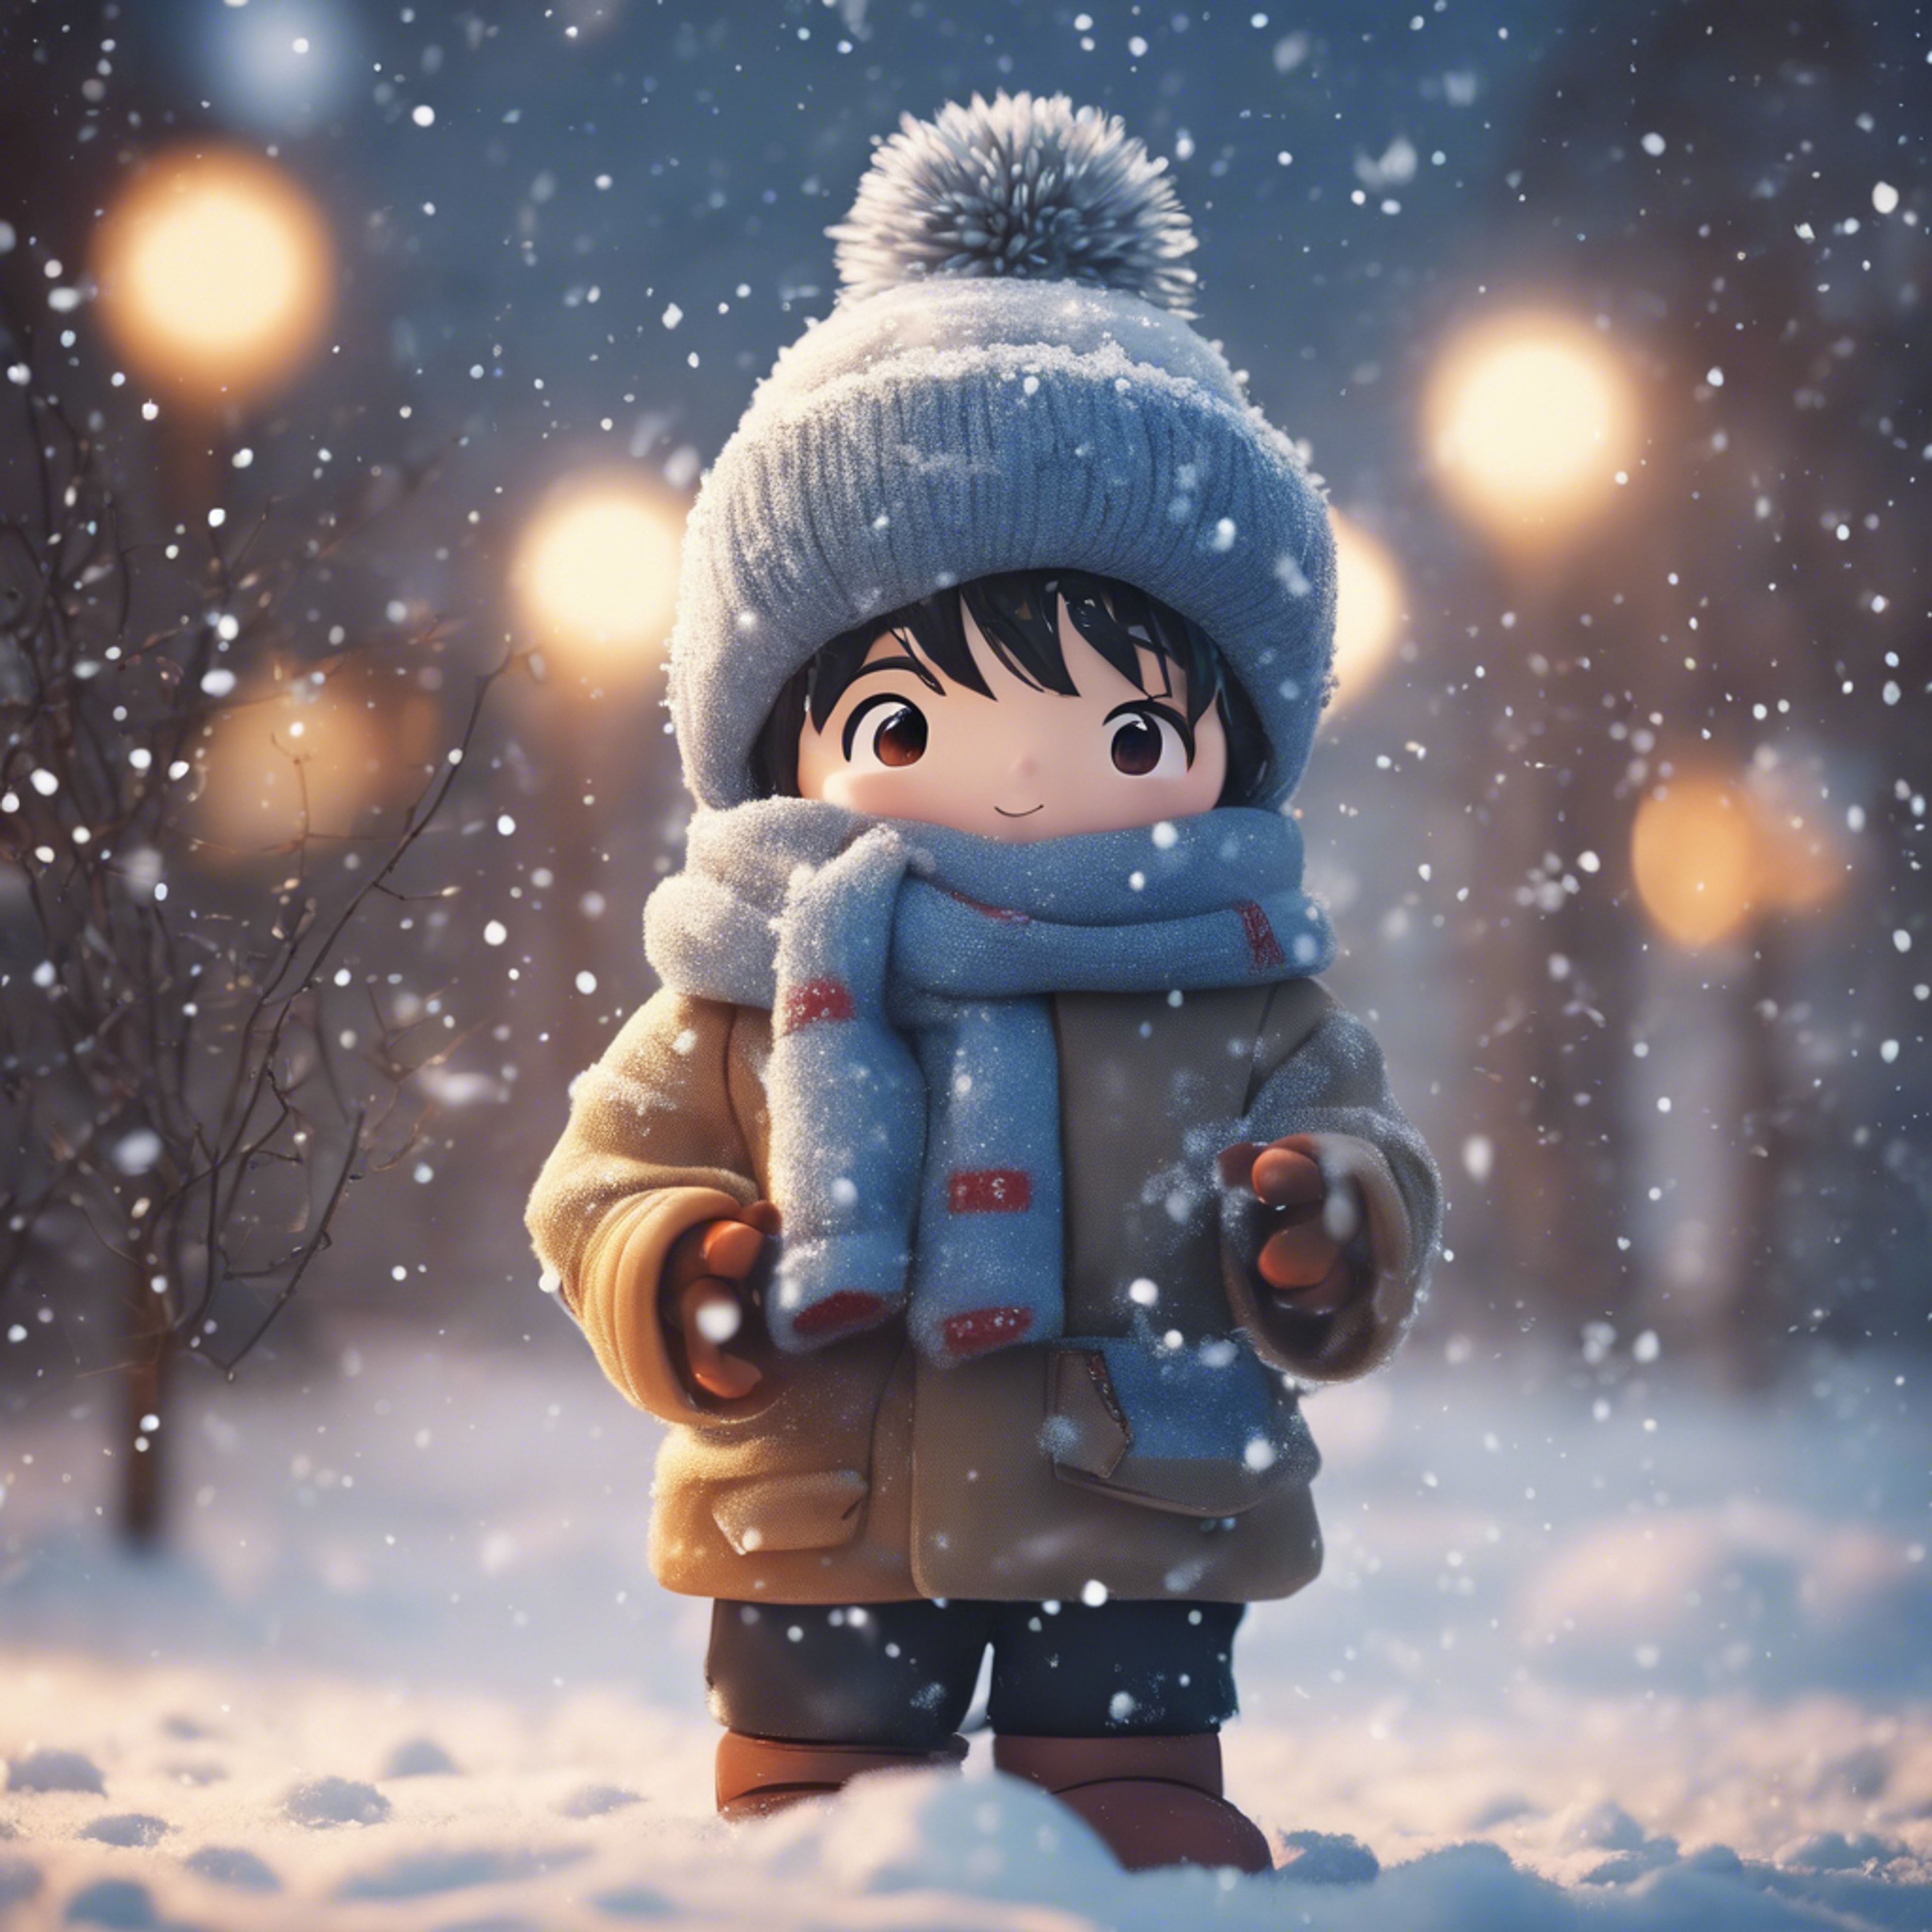 Anime boy wrapped in warm winter clothes, building a playful snowman in the snowfall. Wallpaper[d4075dc9b13644f685e7]